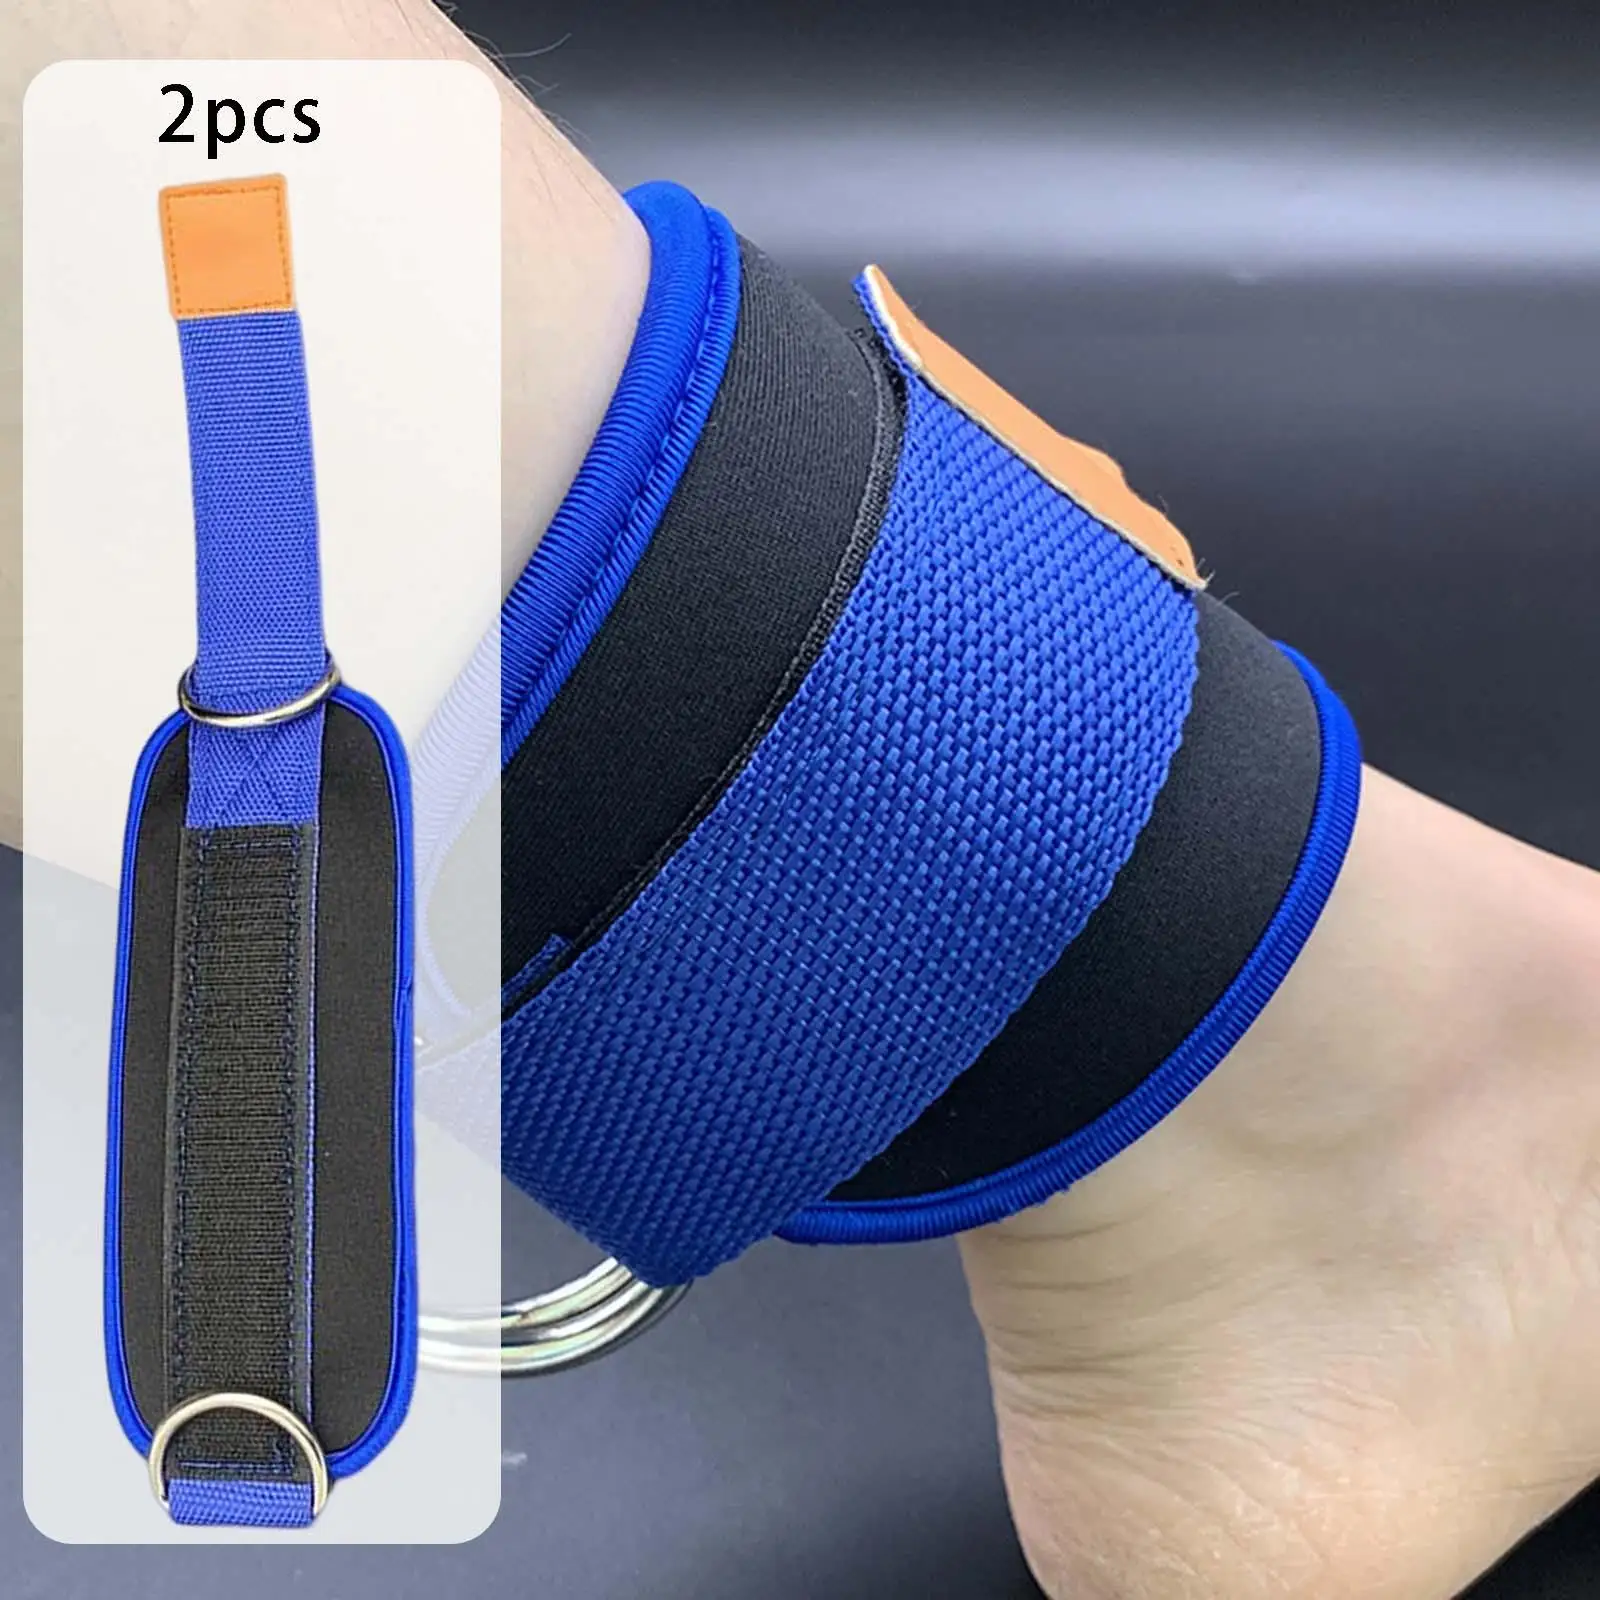 2Pcs Ankle Straps Ankle Cuffs with D Rings Adjustable PU Support Cable Machine Attachments for Glute Workouts Kickbacks Curls 